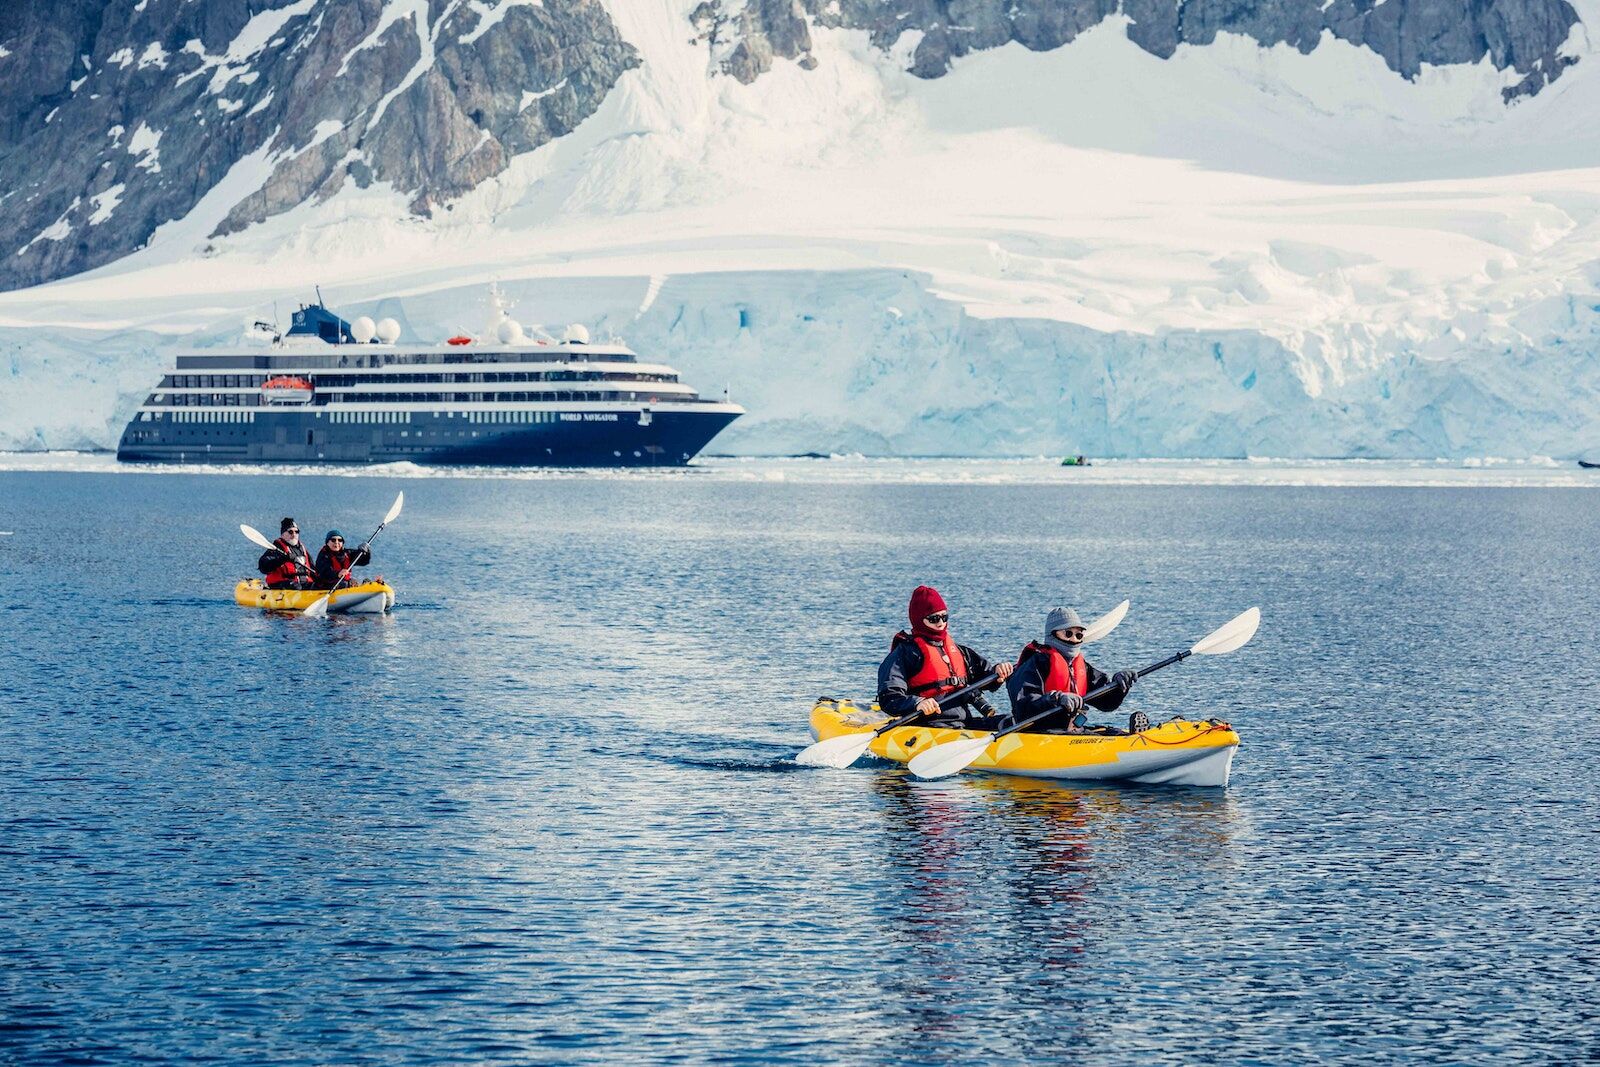 Trends in cruising: cruises to Antarctica with active excursions